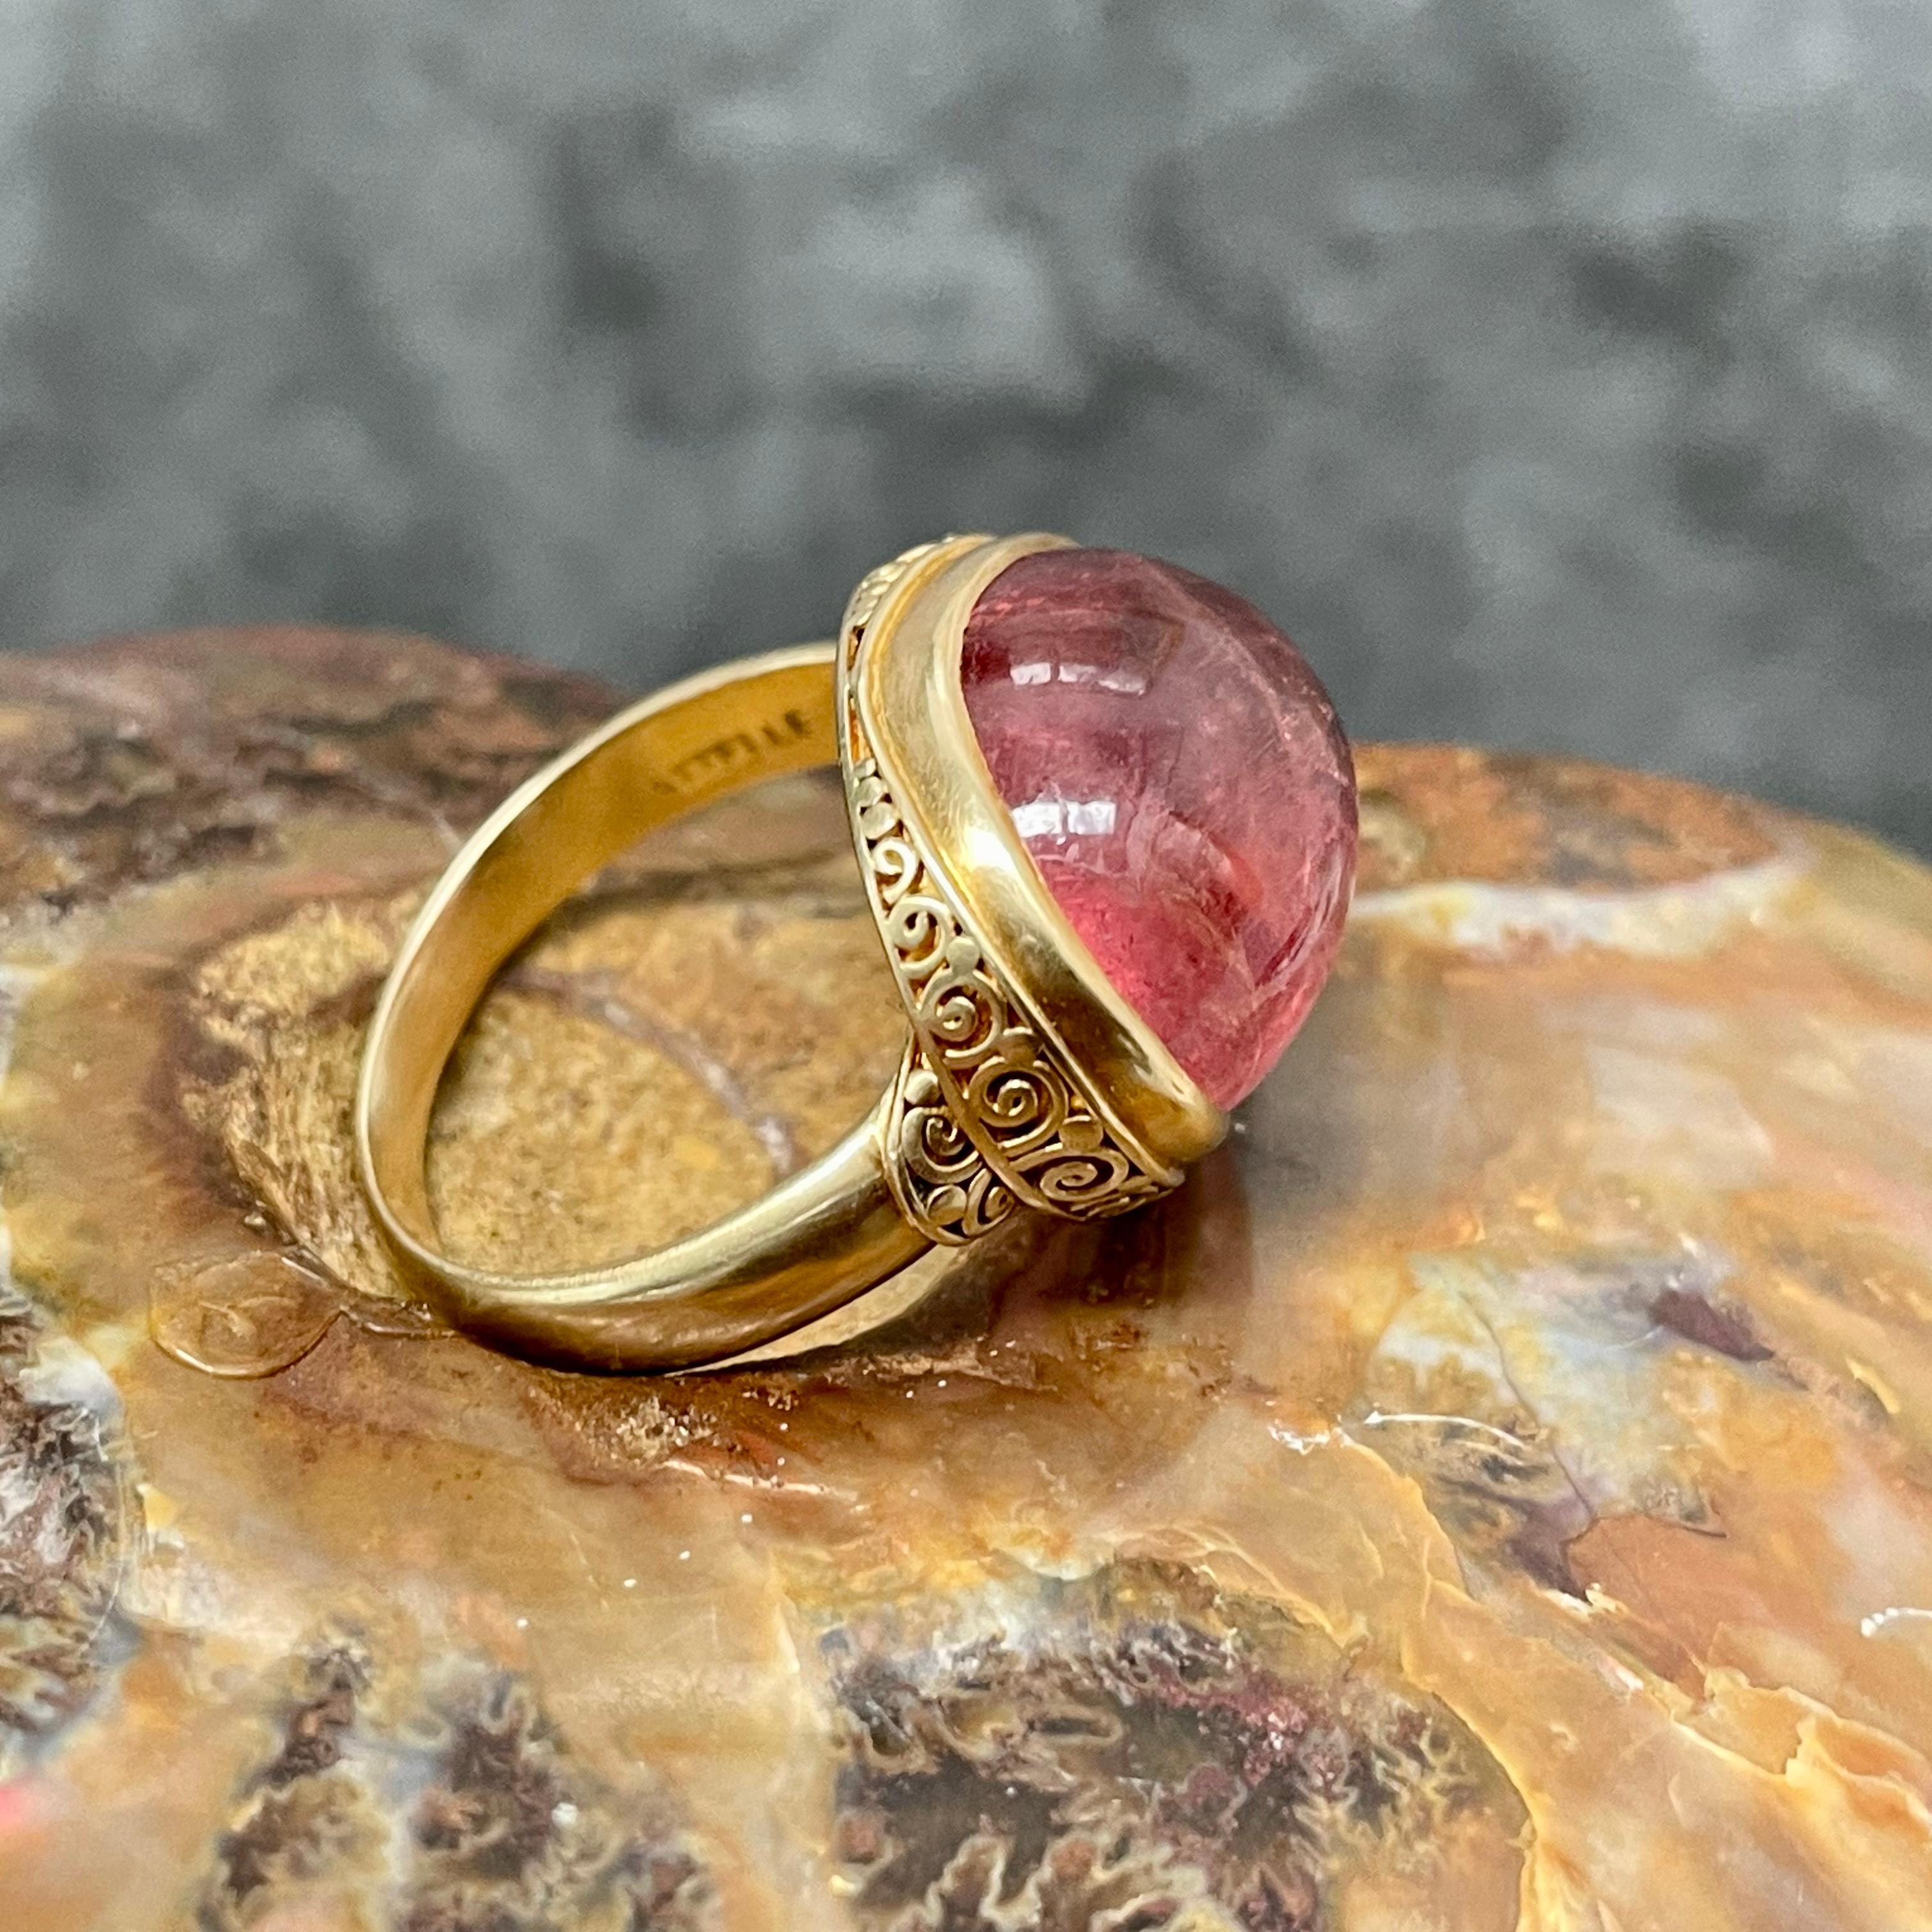 Steven Battelle 13.1 Carats Pink Tourmaline 18K Gold Ring In New Condition For Sale In Soquel, CA